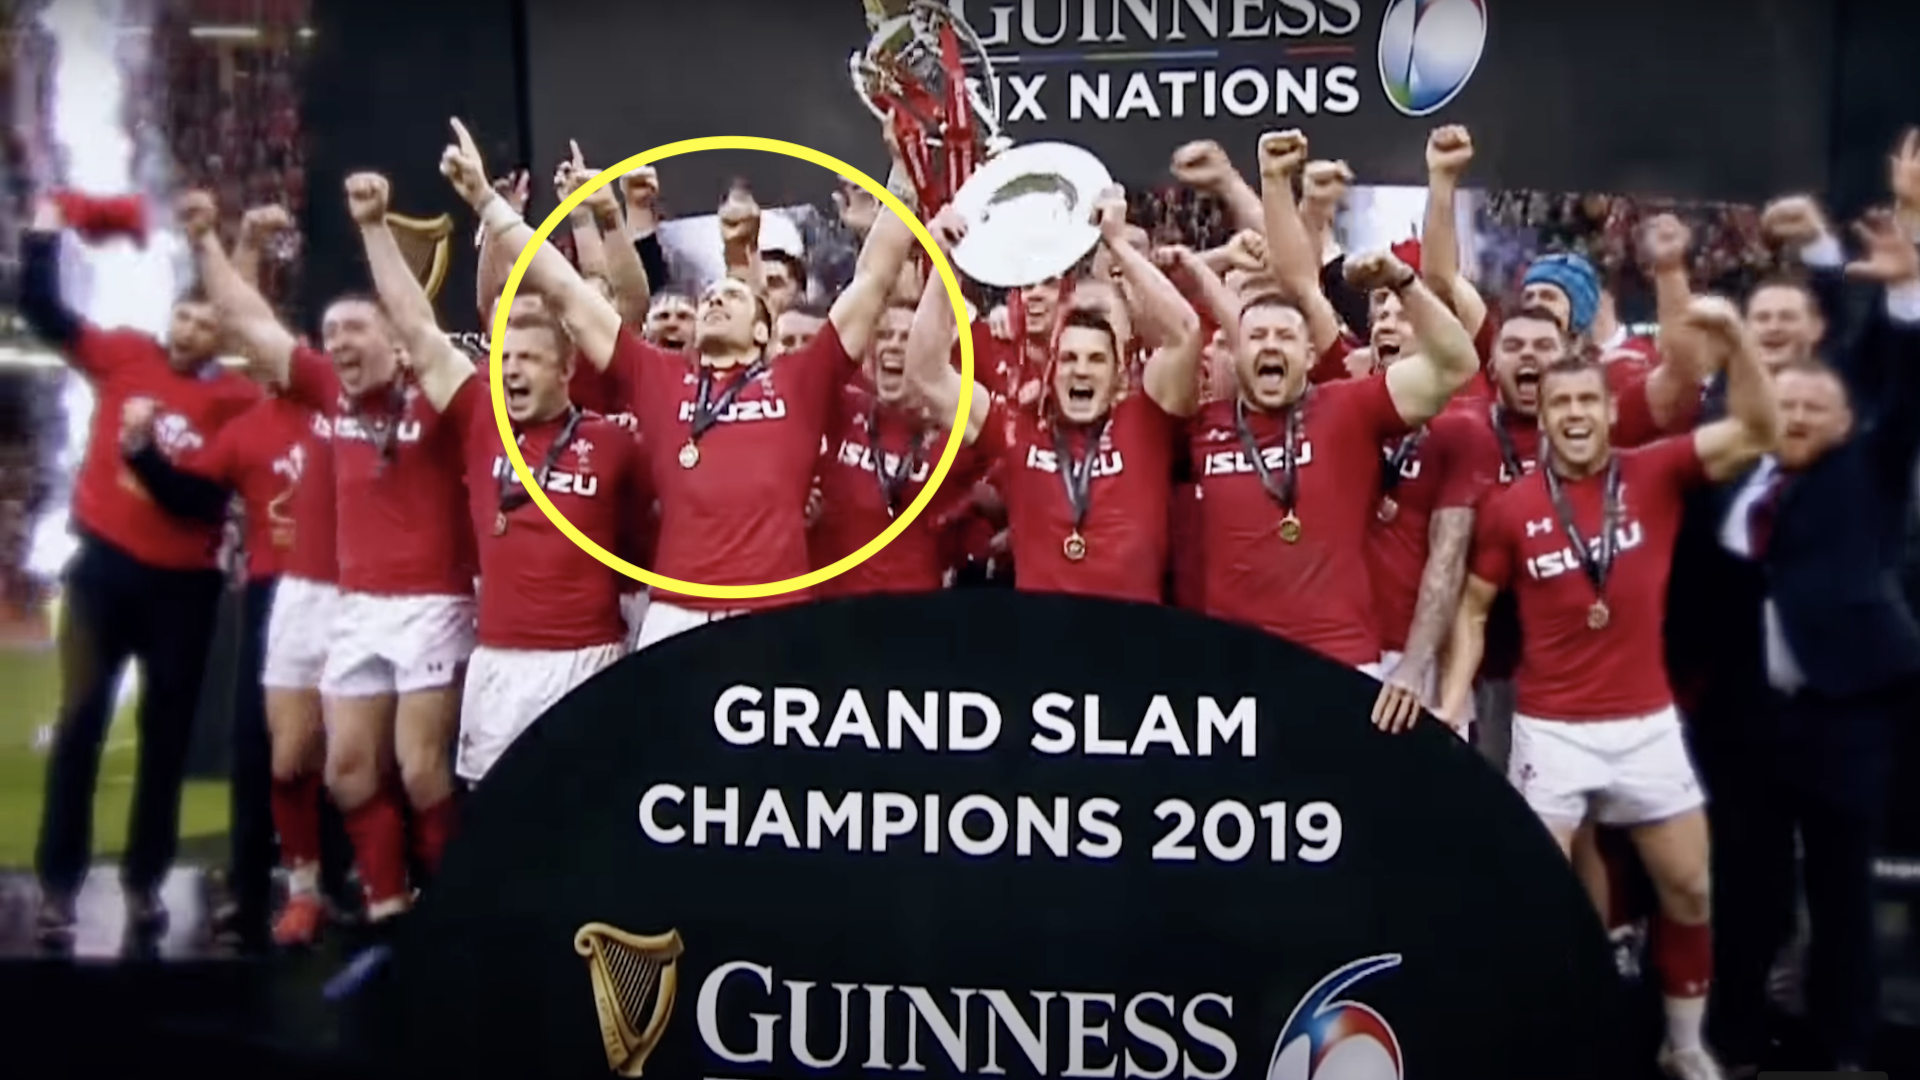 Wales prepare to sue the Internet after ChatGPT's All-Time Six Nations XV